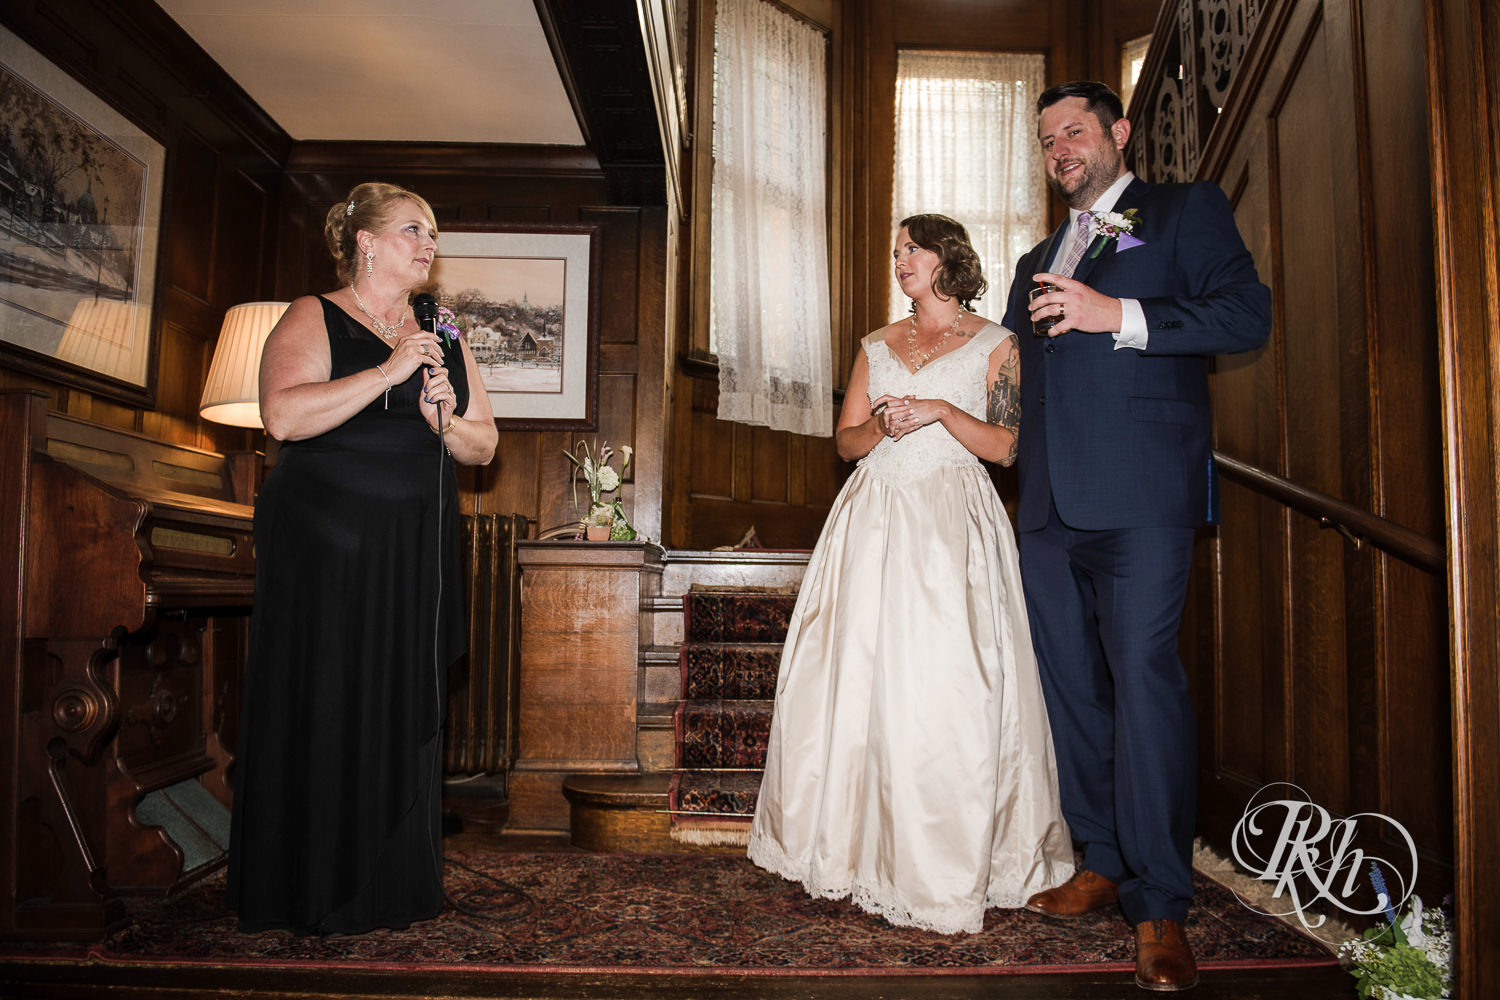 Bride and groom watch as speeches are given during wedding reception at Summit Manor wedding in Saint Paul, Minnesota.